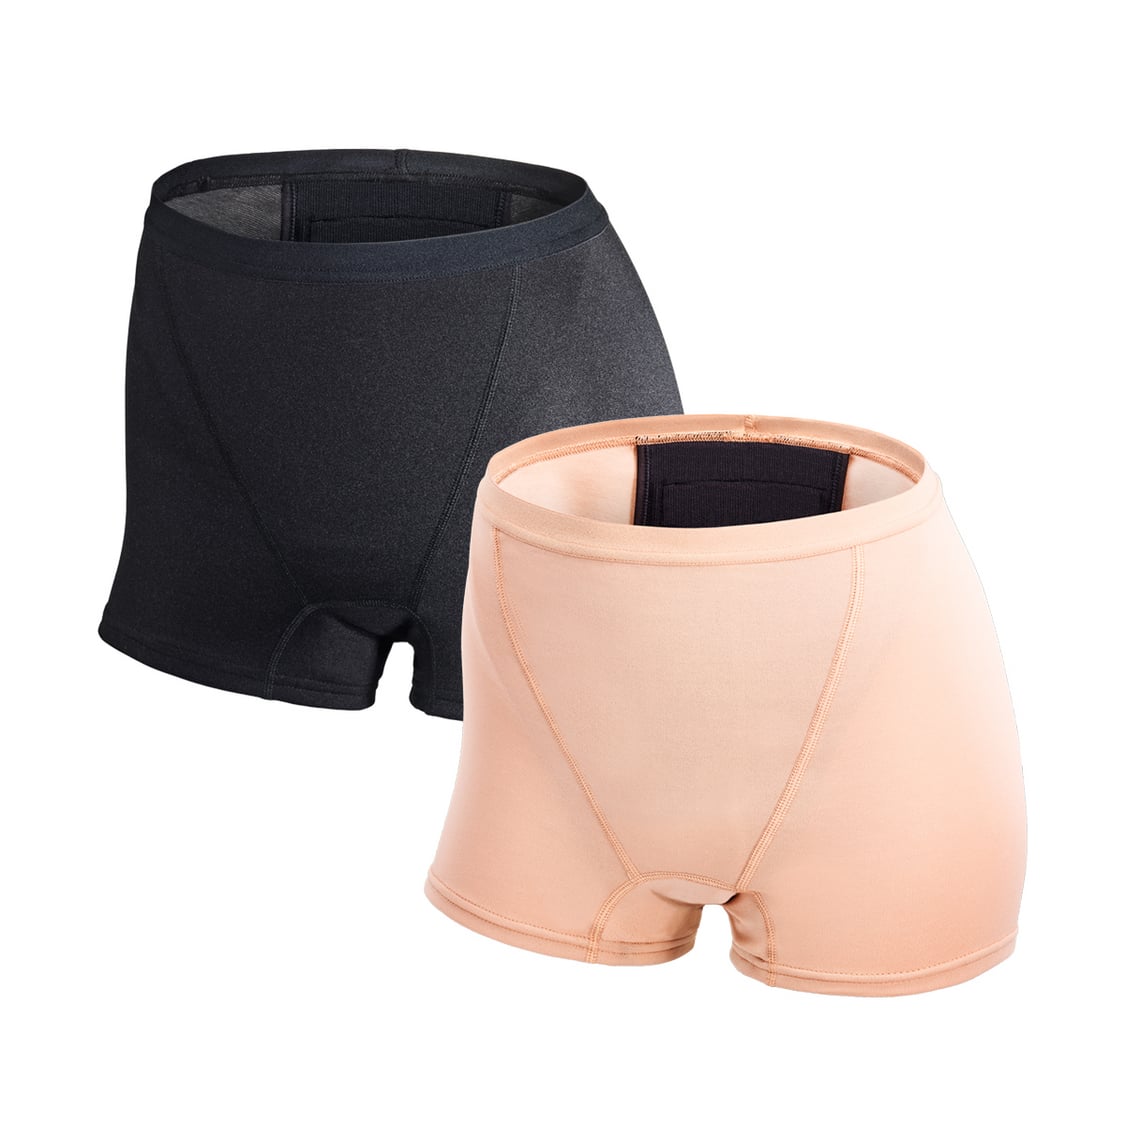 Three of the ultra-absorbent sanitary shorts by Bé-A, including